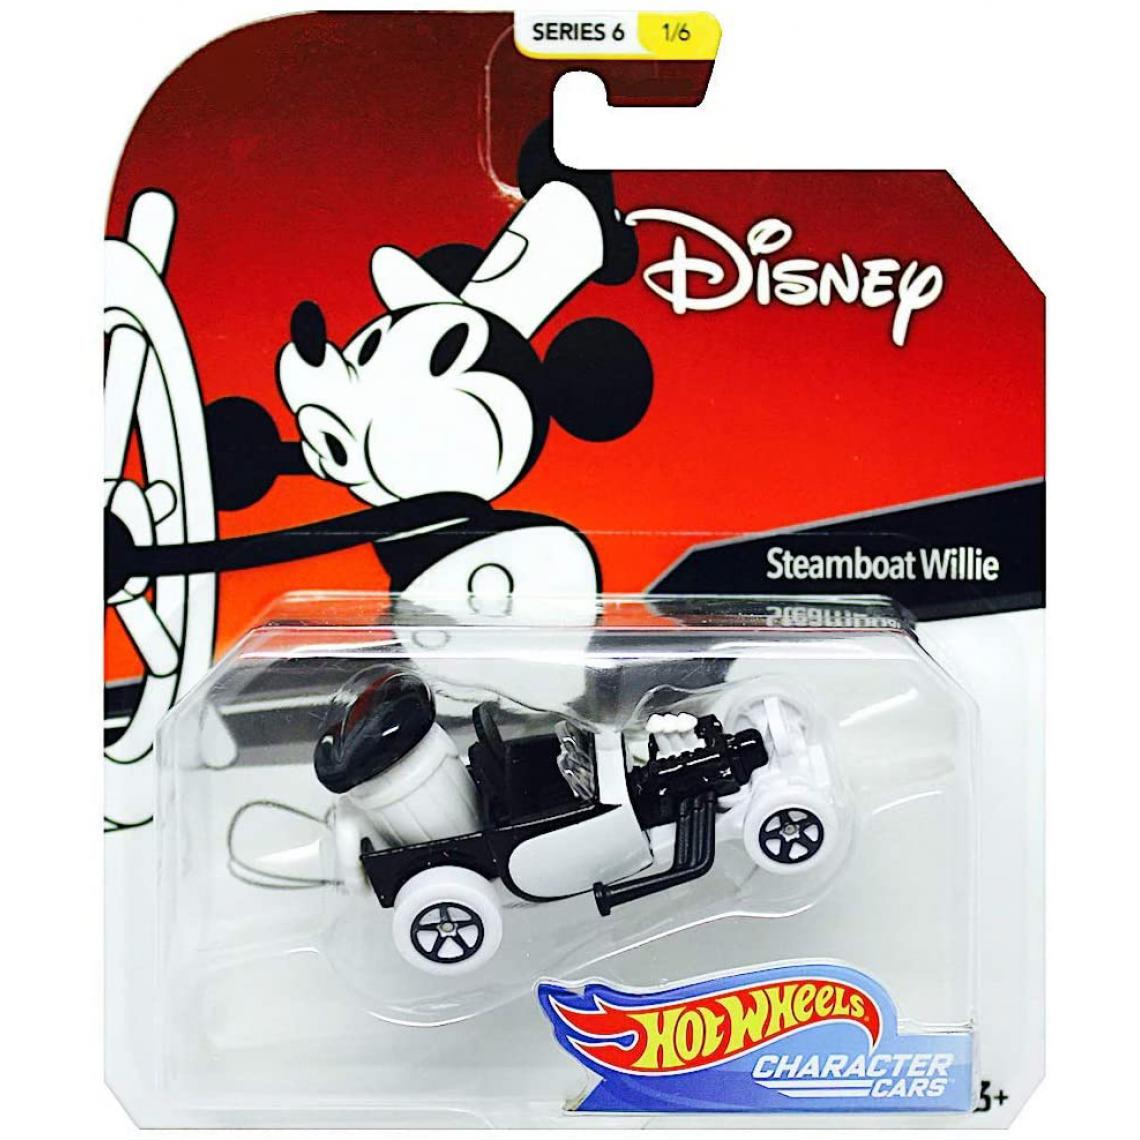 Hot Wheels - véhicule Steamboat Willie Character Car, Series 6 - Voiture de collection miniature